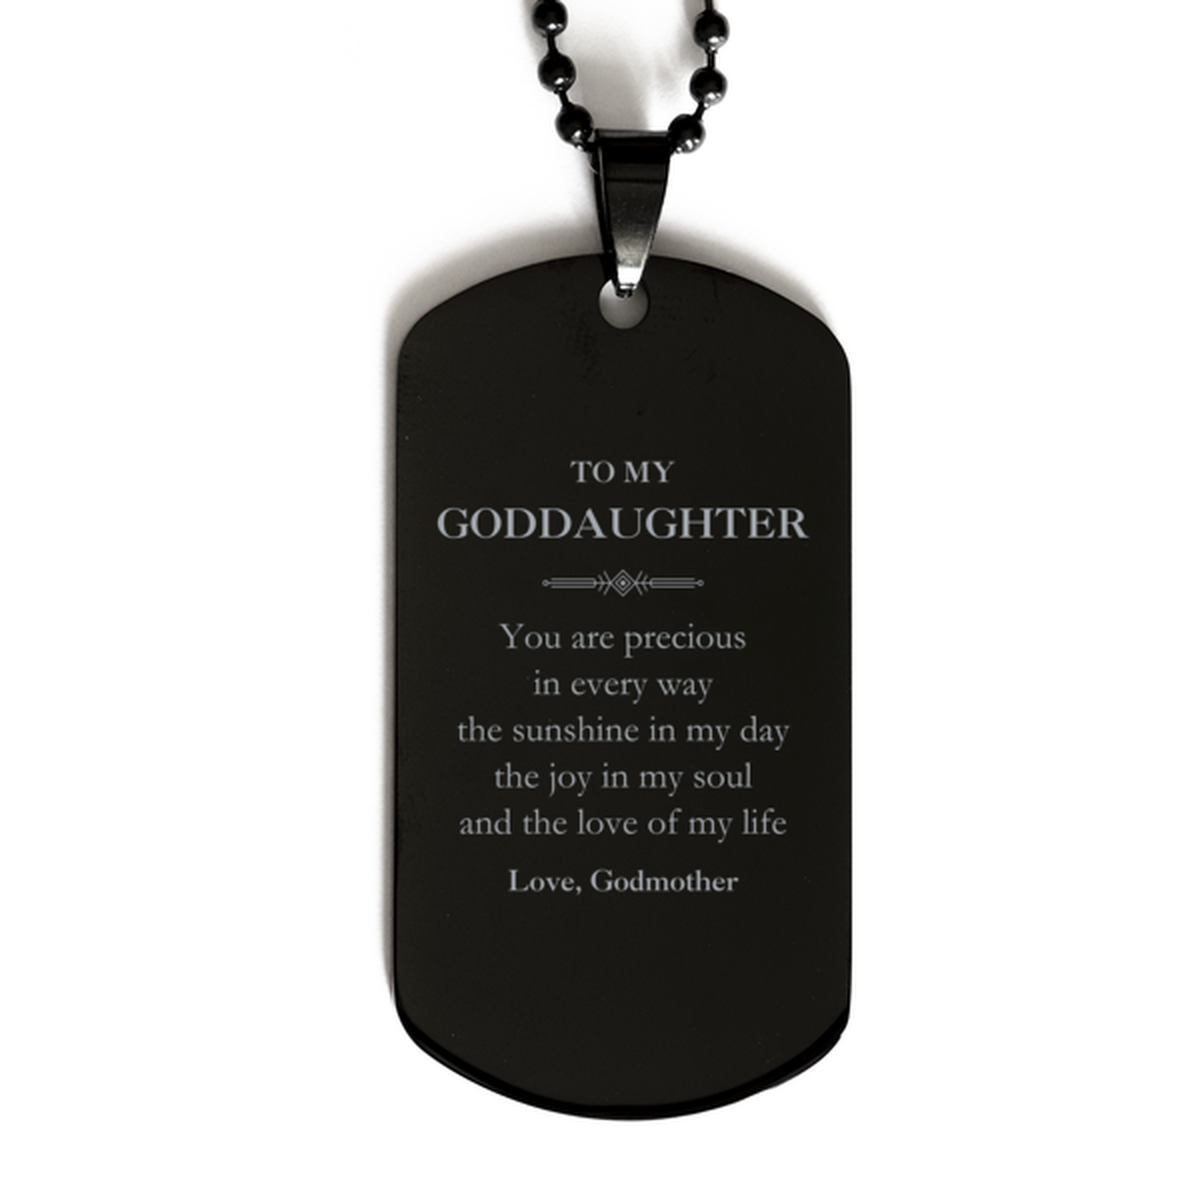 Graduation Gifts for Goddaughter Black Dog Tag Present from Godmother, Christmas Goddaughter Birthday Gifts Goddaughter You are precious in every way the sunshine in my day. Love, Godmother